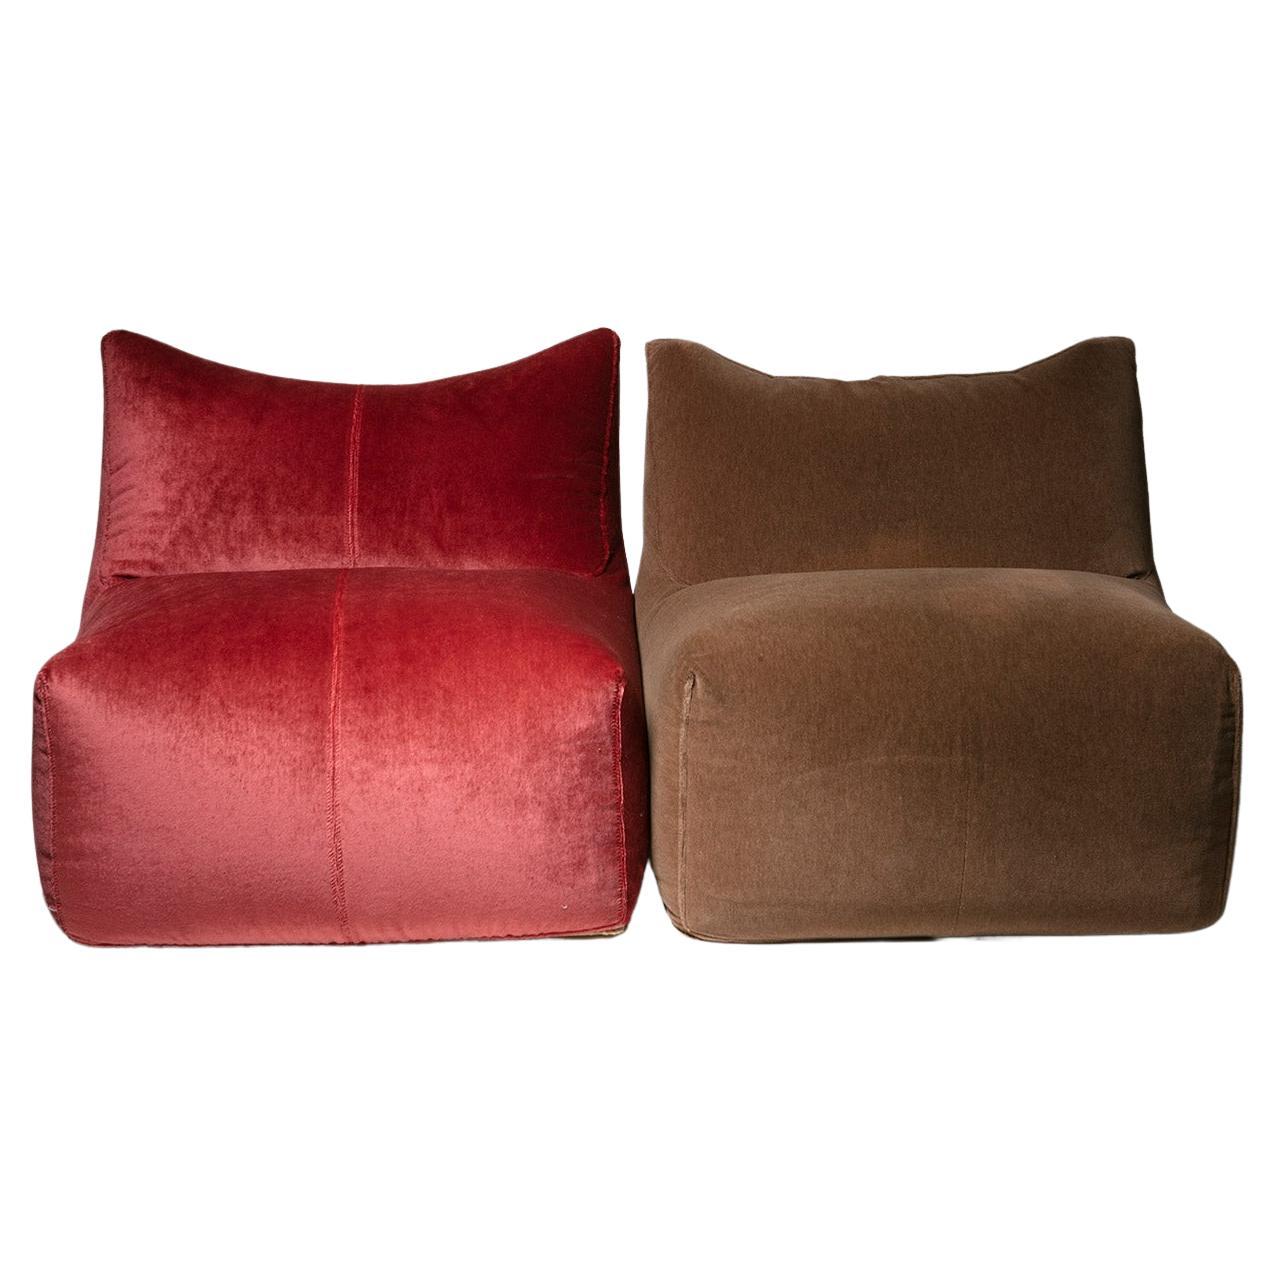 Two "Bambole" Lounge Chairs by Mario Bellini for B&B Italia, 1970s For Sale